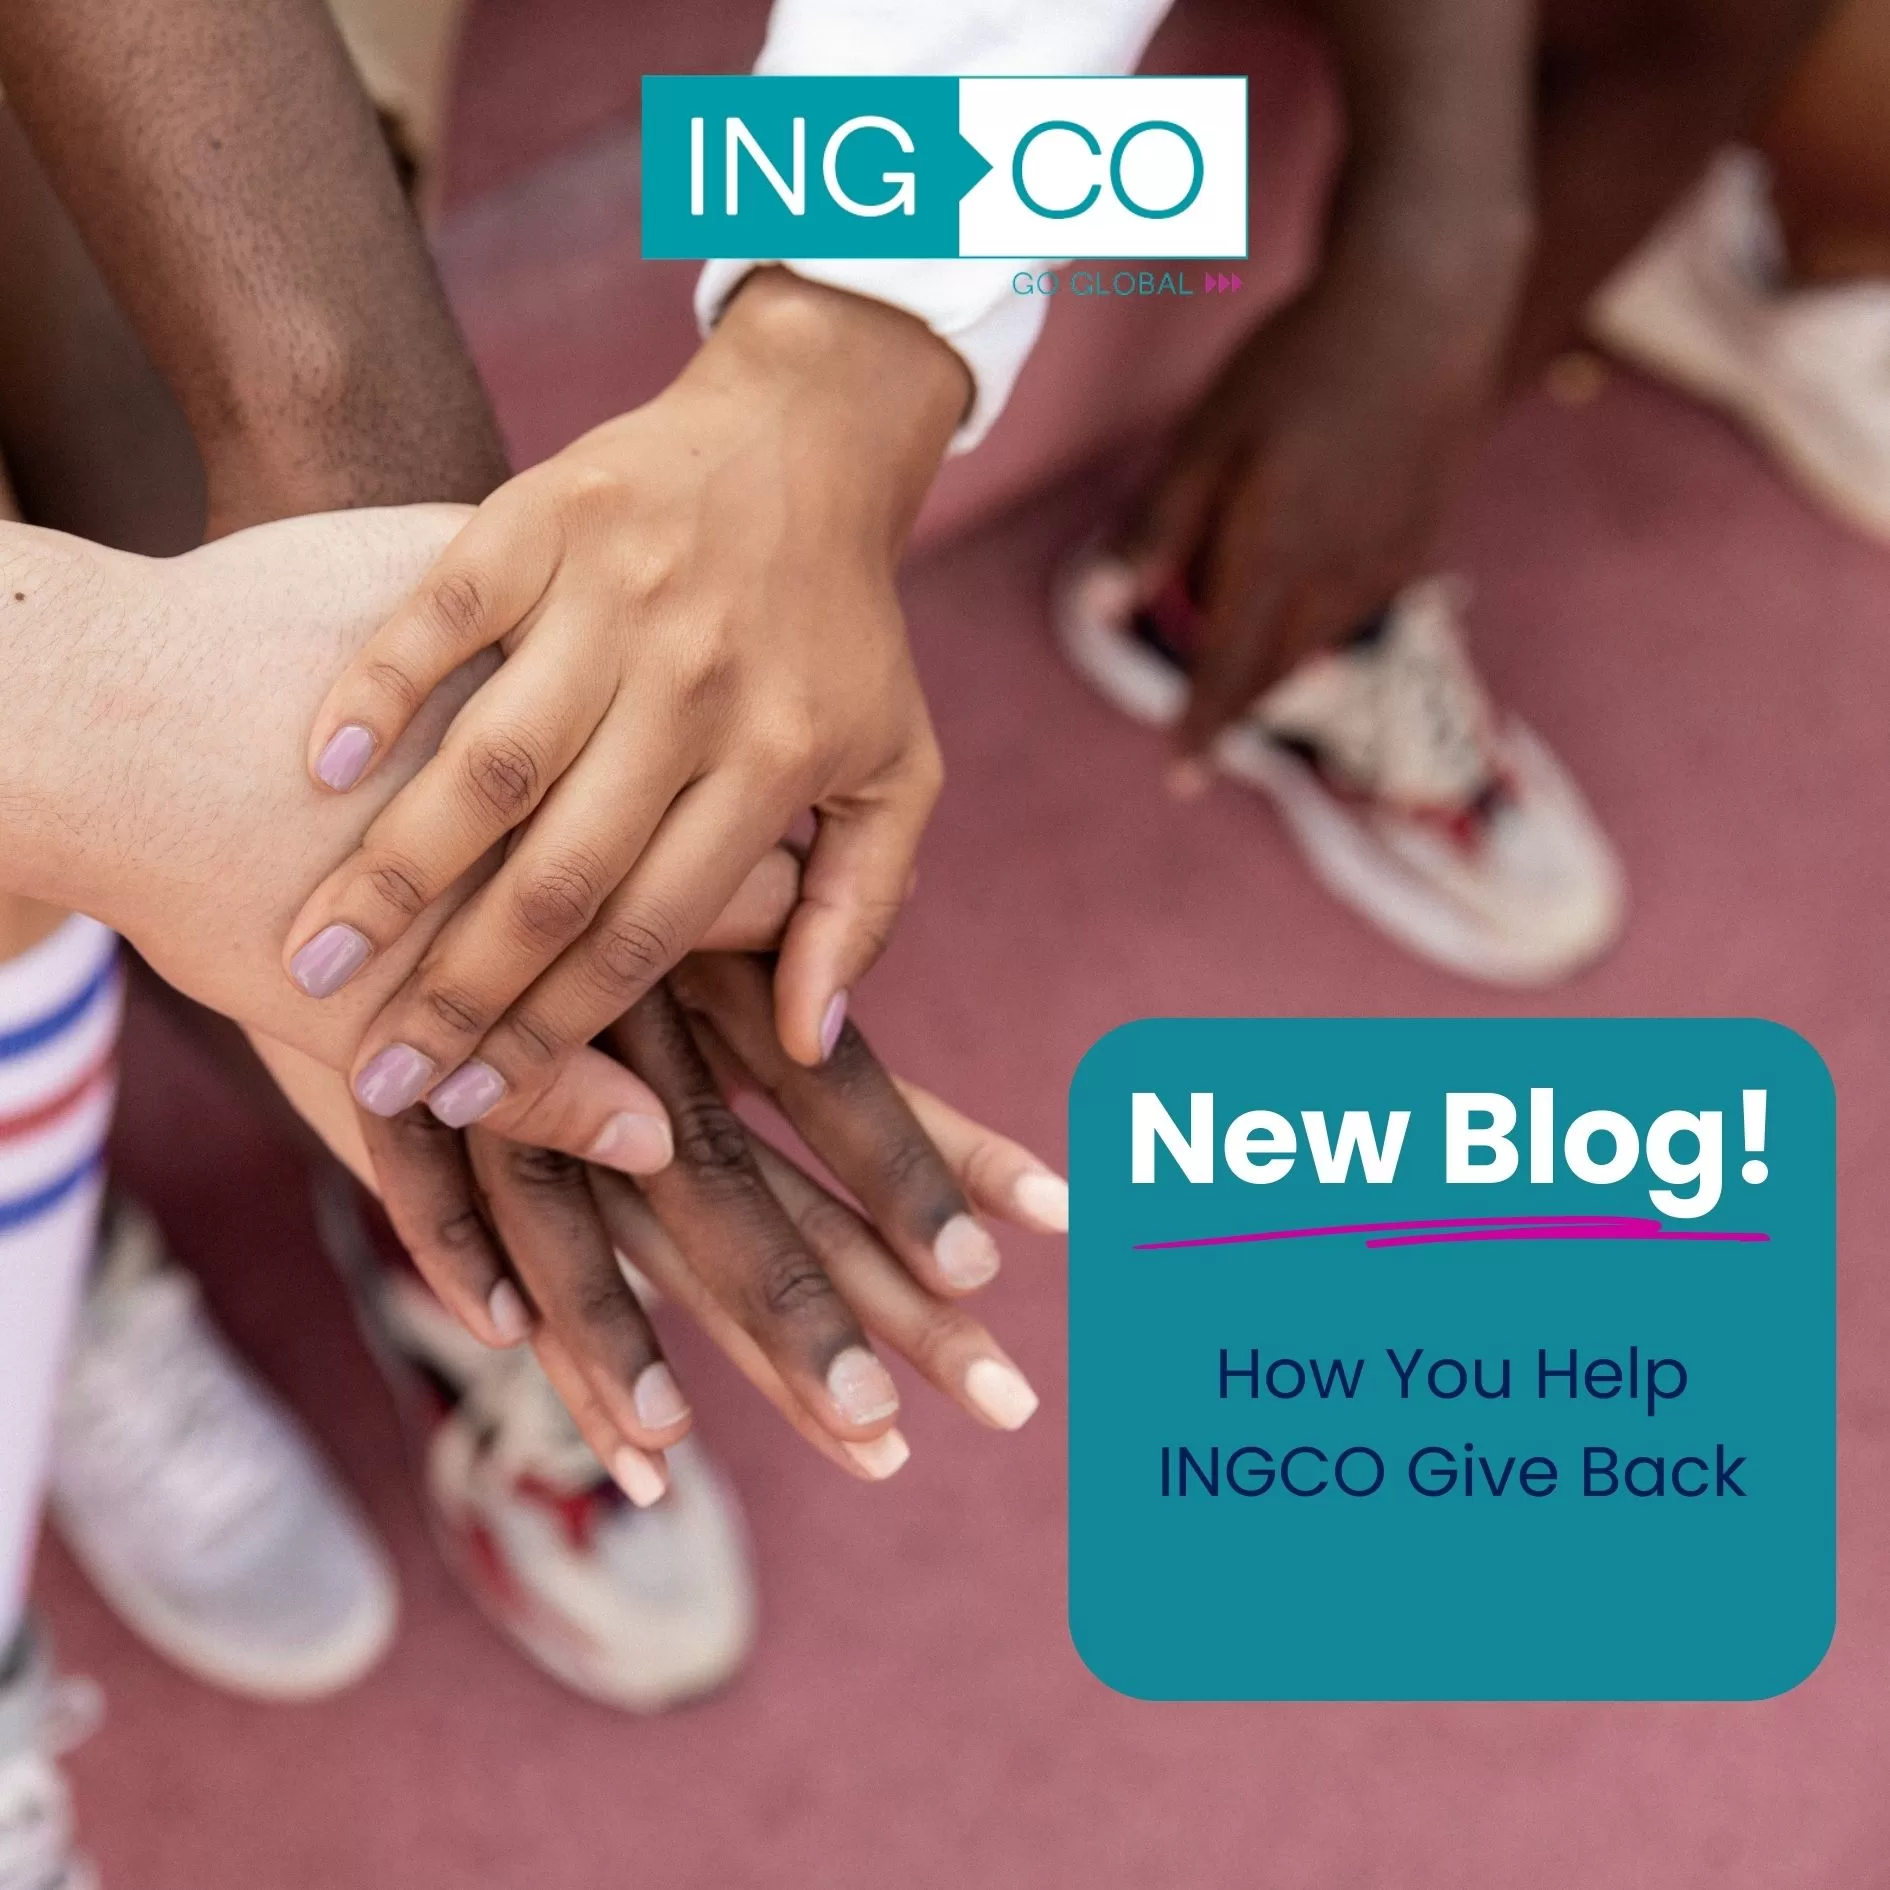 How You Help INGCO Give Back